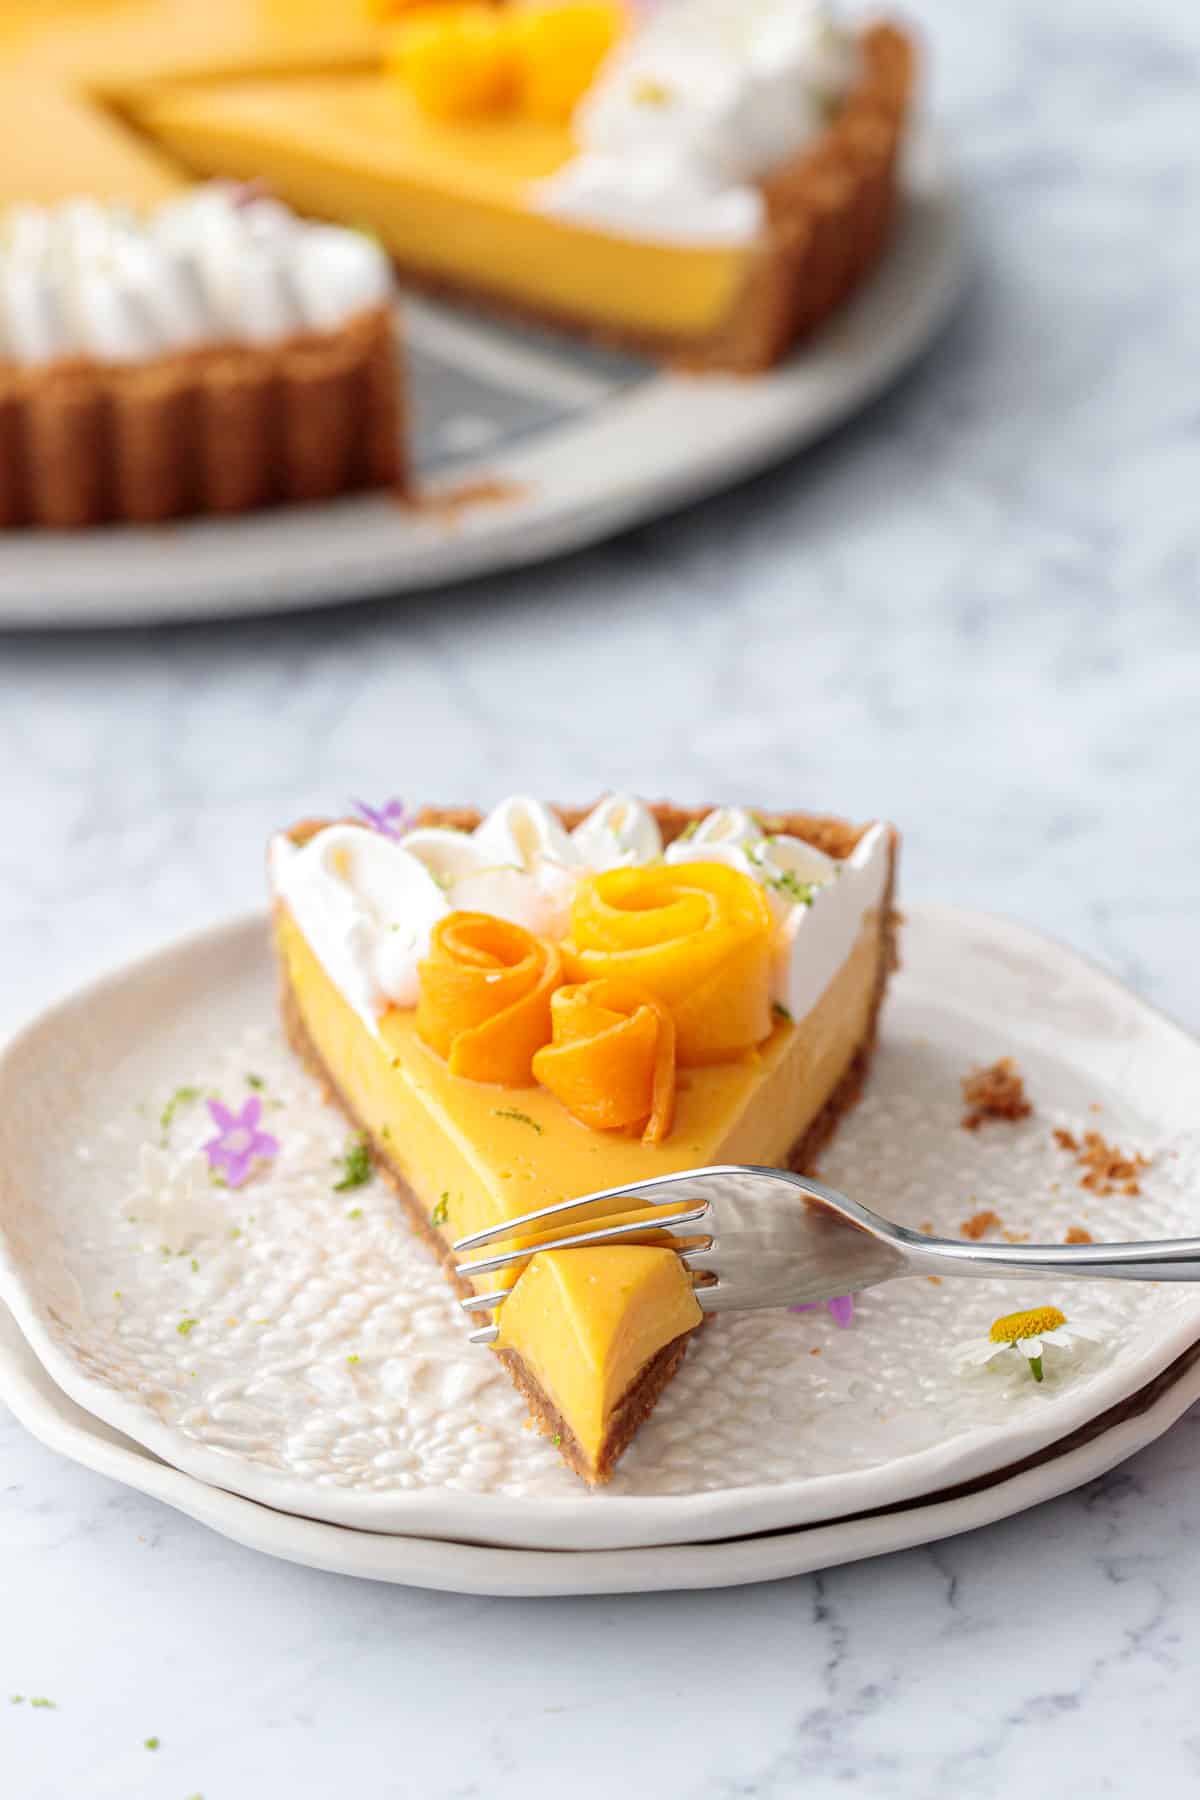 Fork cutting into a slice of Mango Lime Tart on a white lace plate.